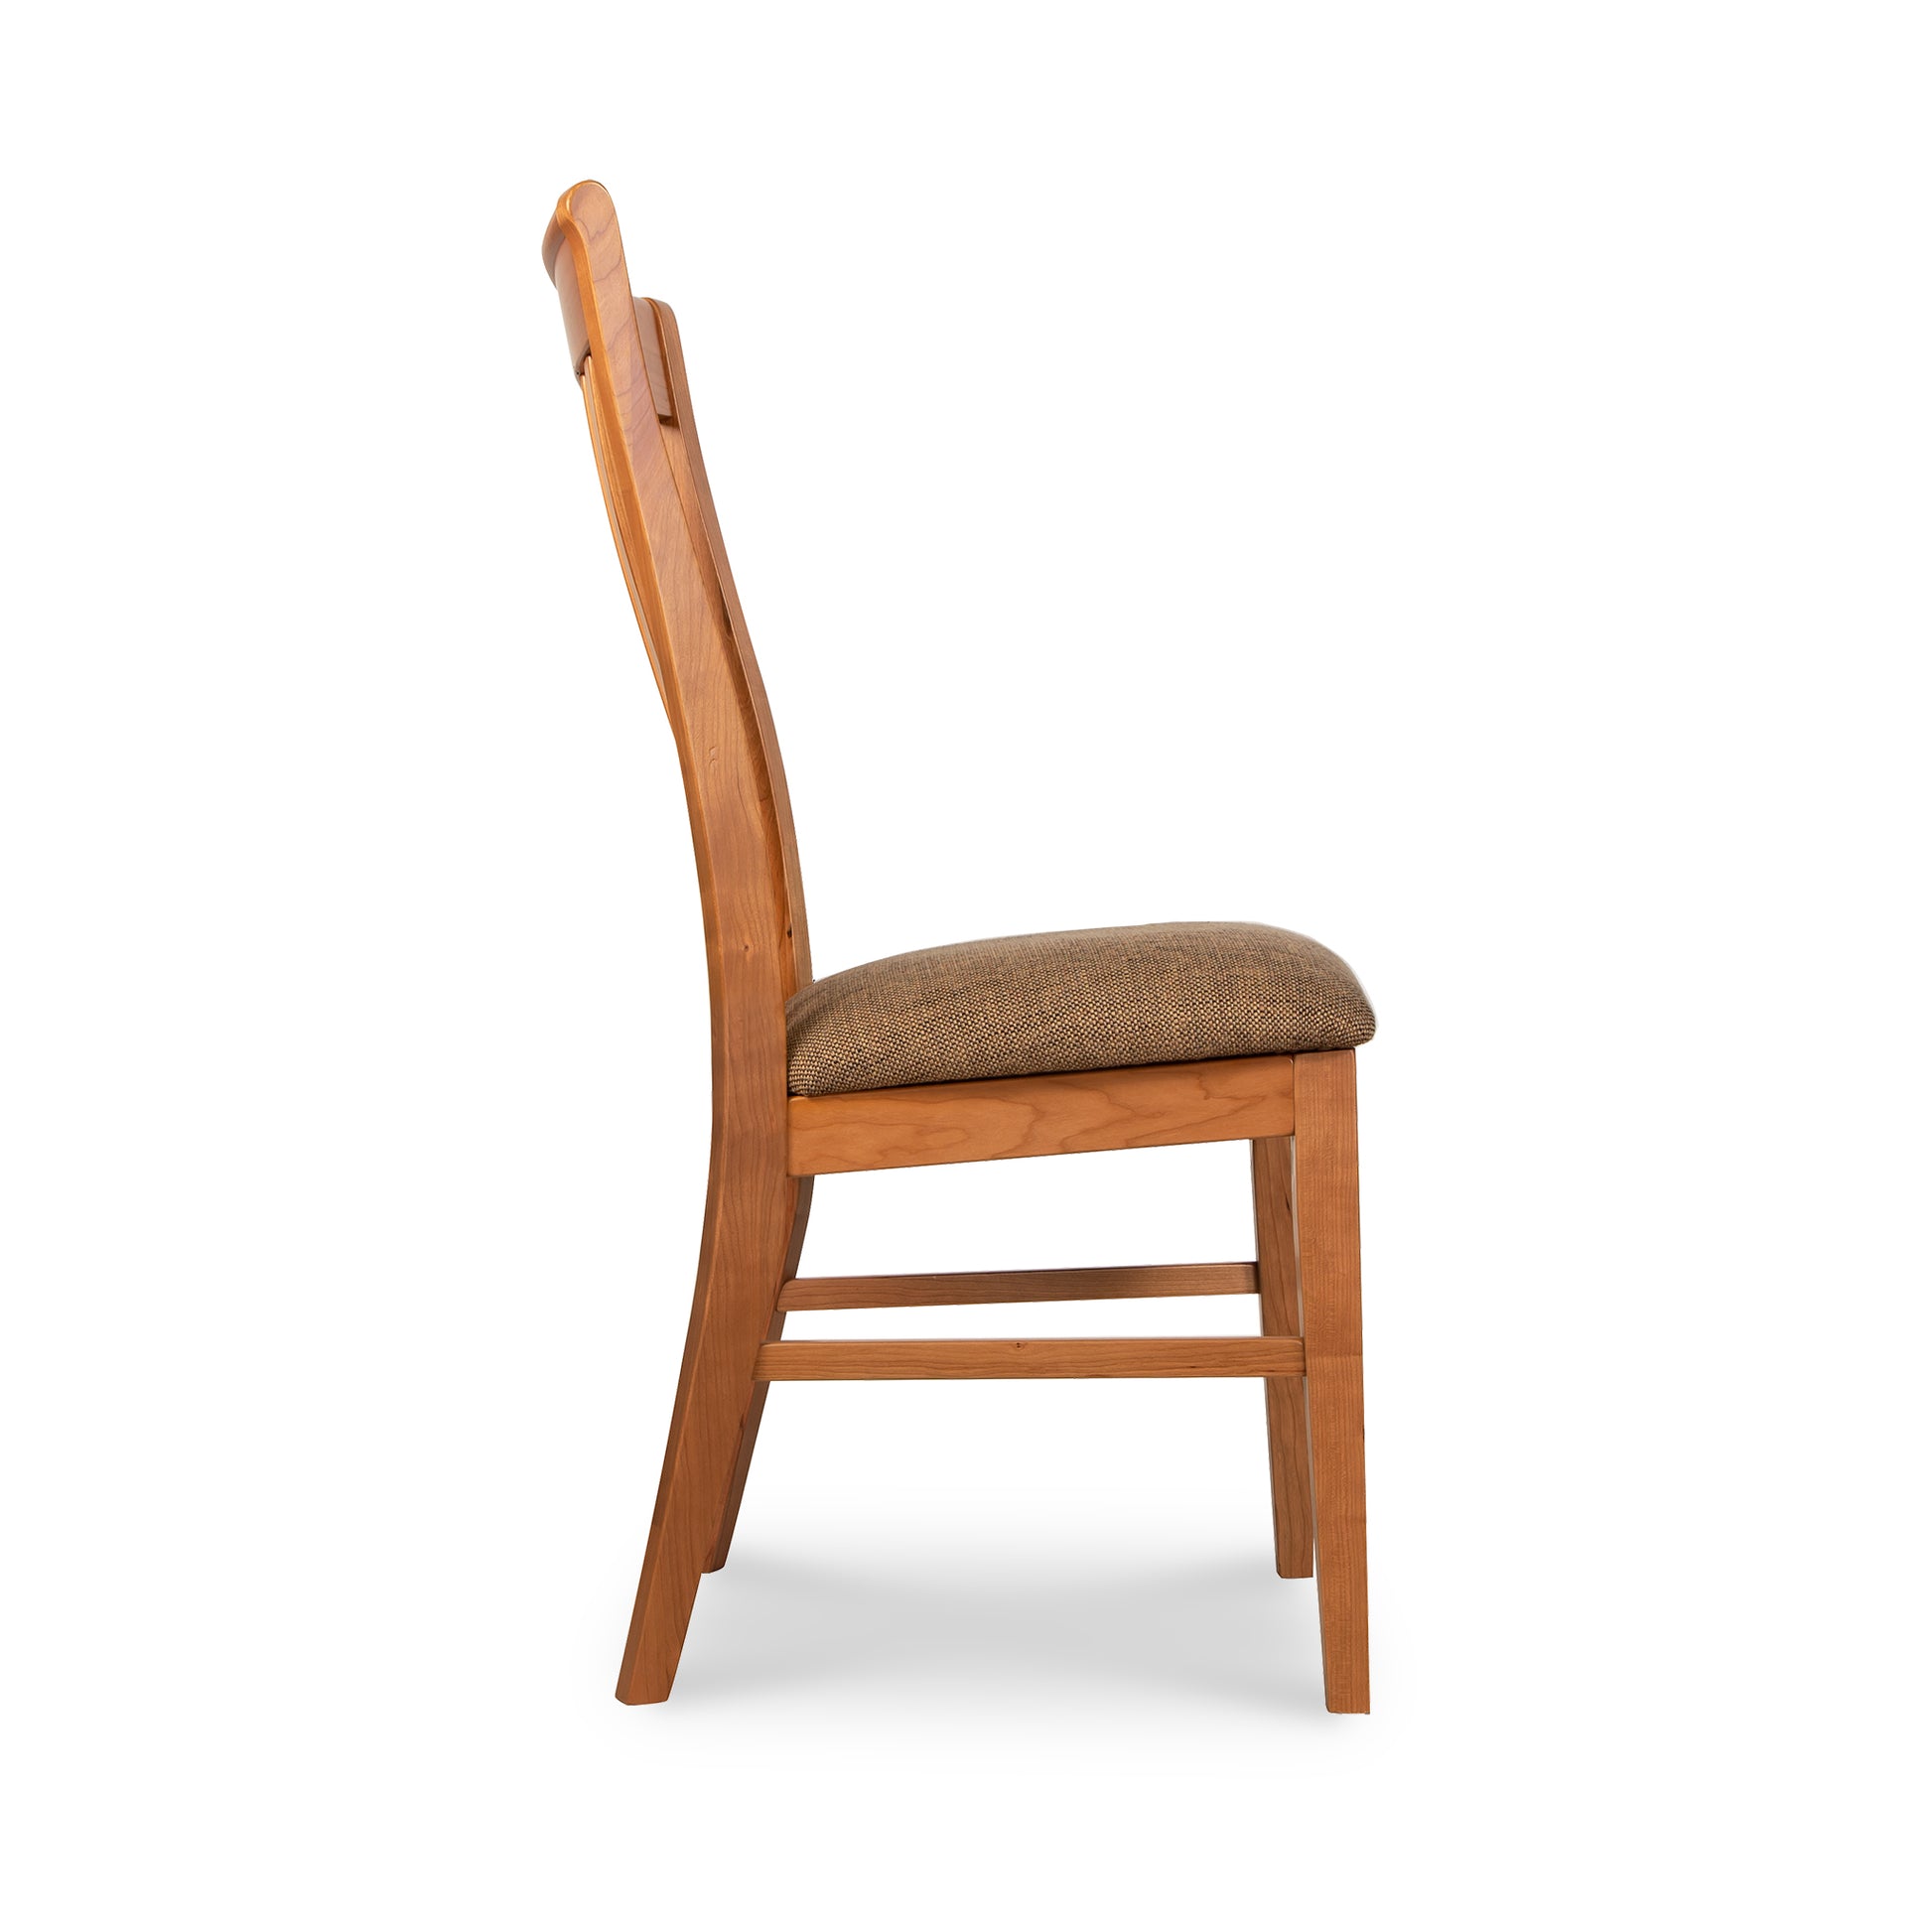 A wooden dining chair with a tan seat.